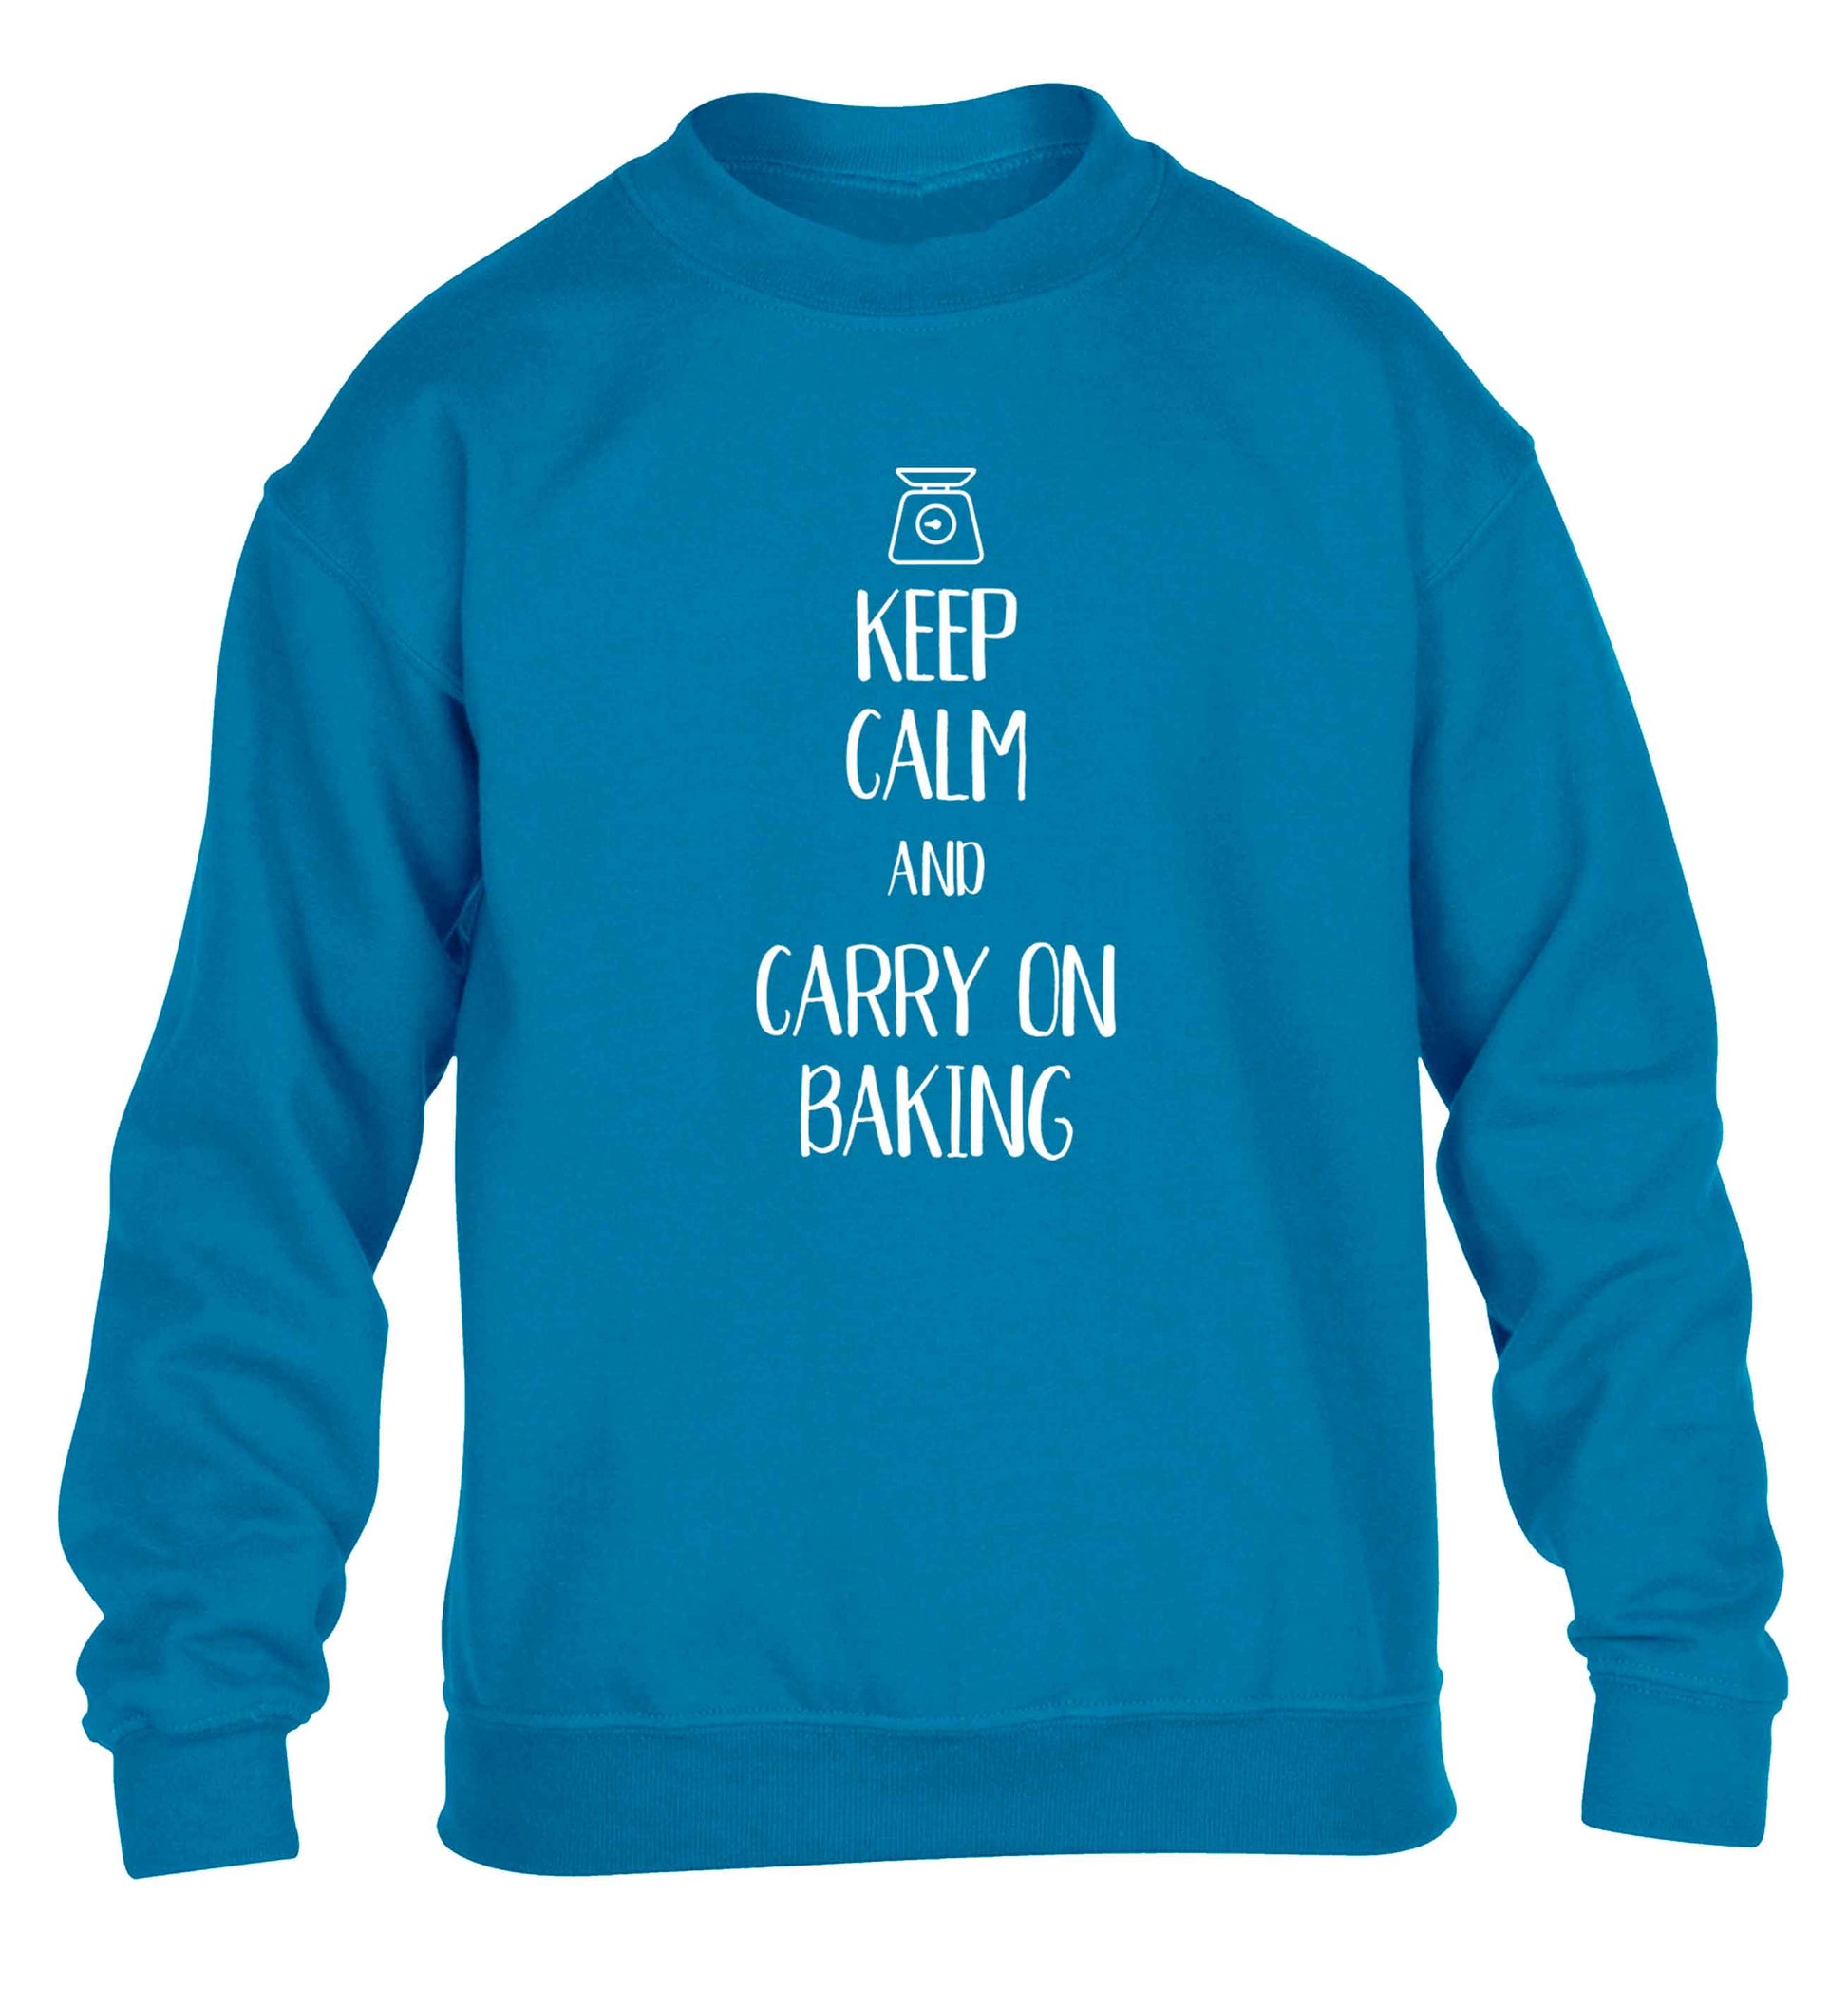 Keep calm and carry on baking children's blue sweater 12-13 Years